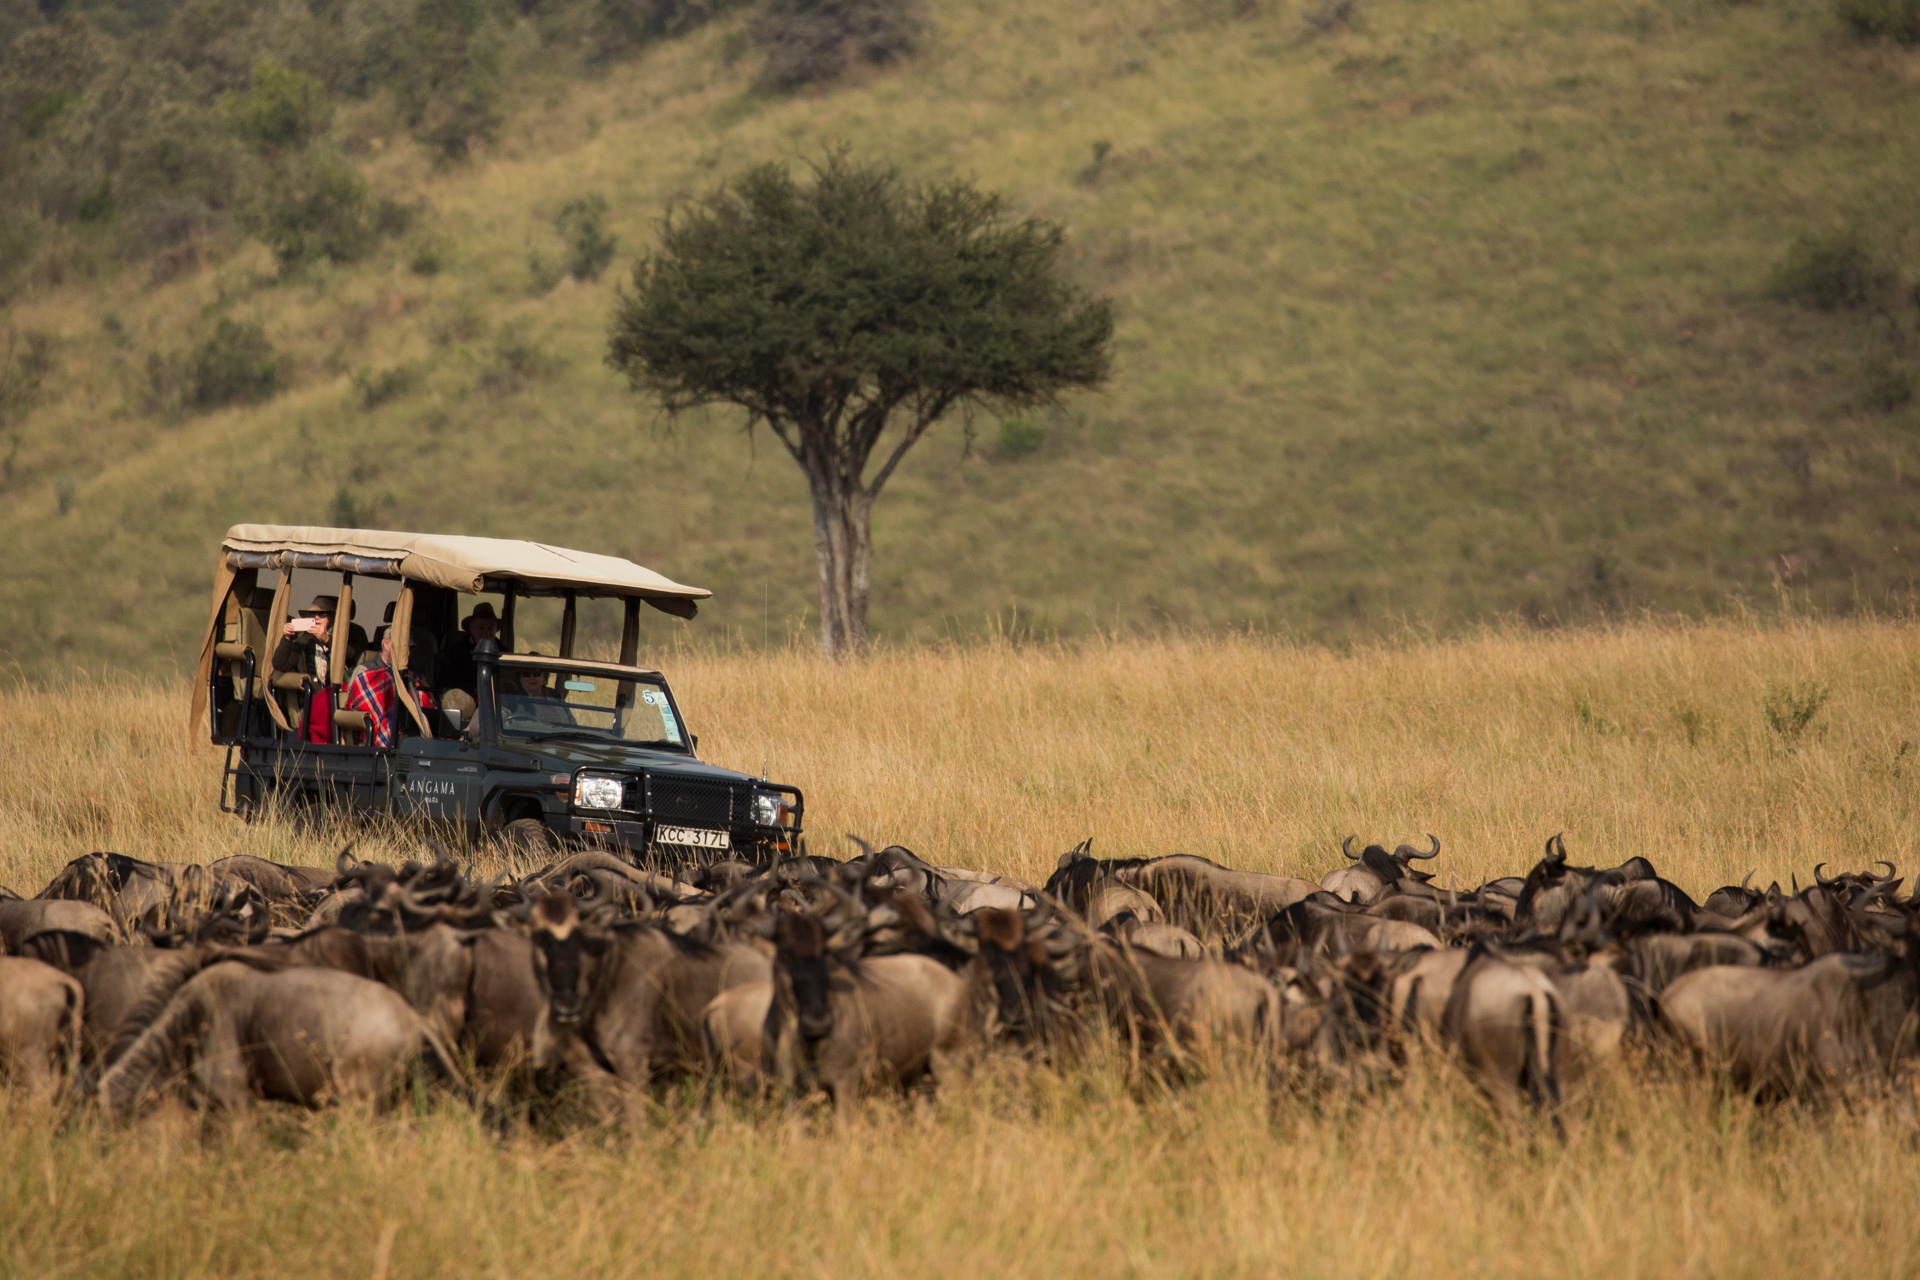 game vehicle and wildebeest